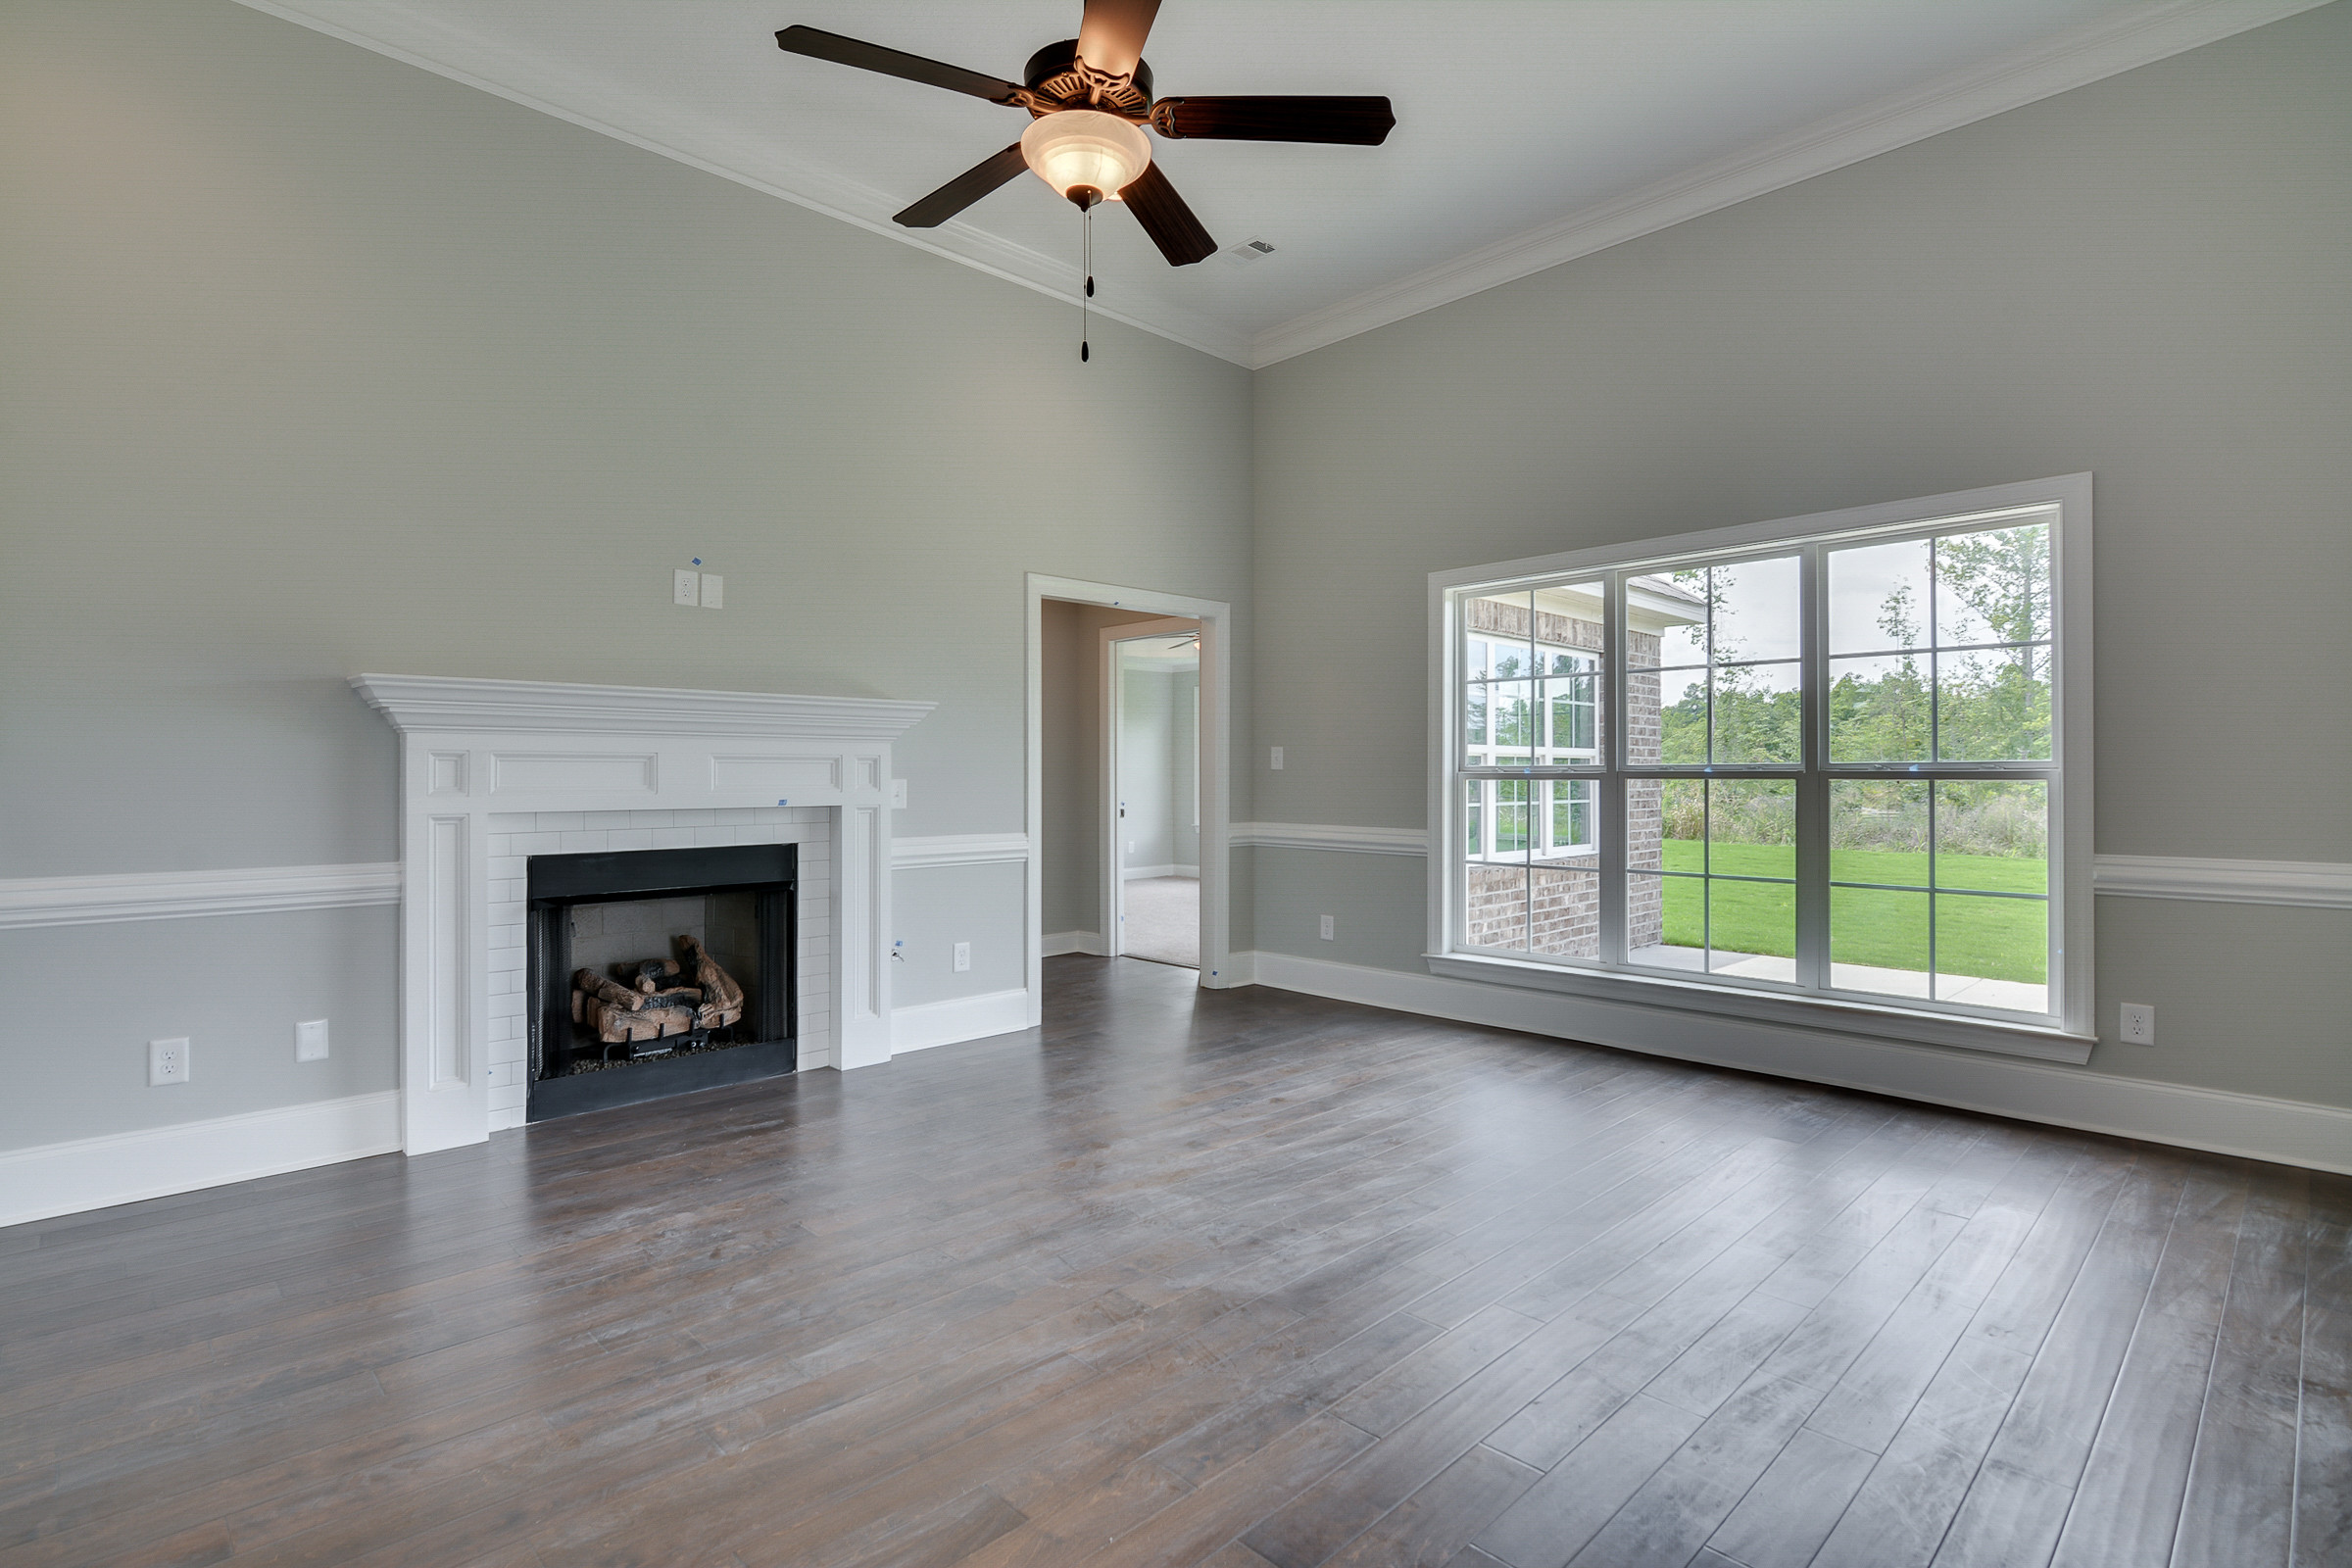 21 attractive King Hardwood Floors Bridgeport Ct 2024 free download king hardwood floors bridgeport ct of kelarie berkshire hathaway home services intended for dont miss out inquire today